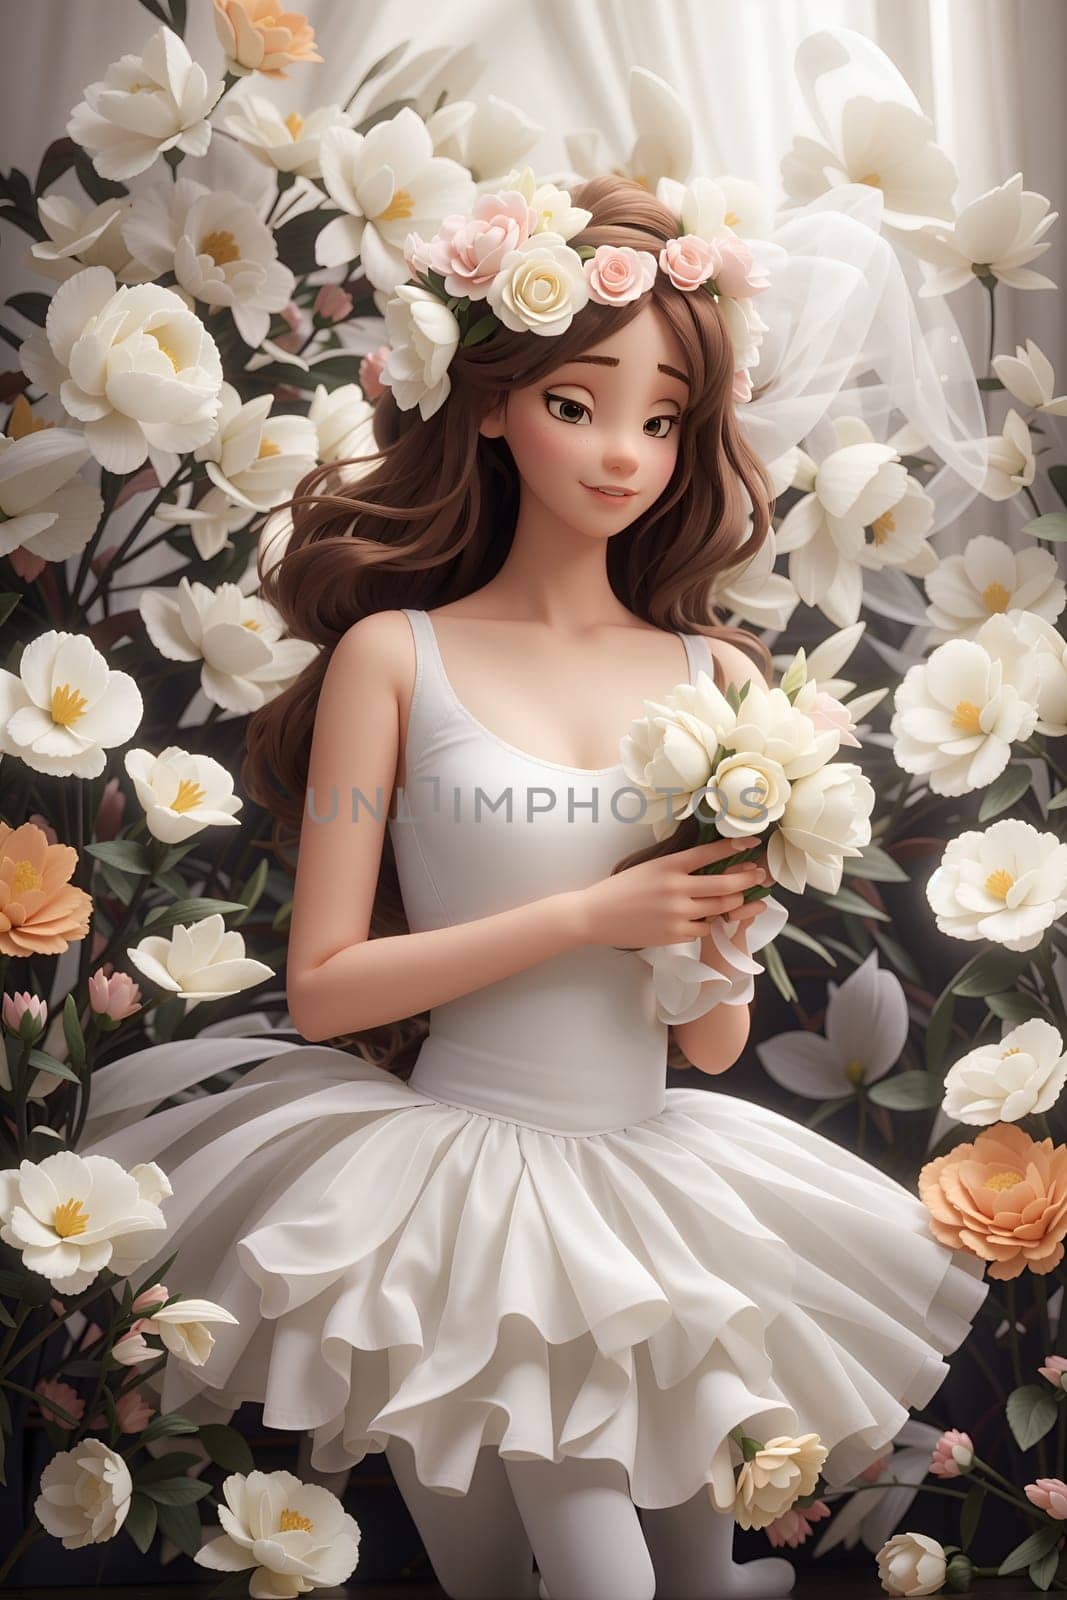 A captivating painting depicting a woman elegantly dressed in white, delicately holding a bouquet of vibrant flowers.